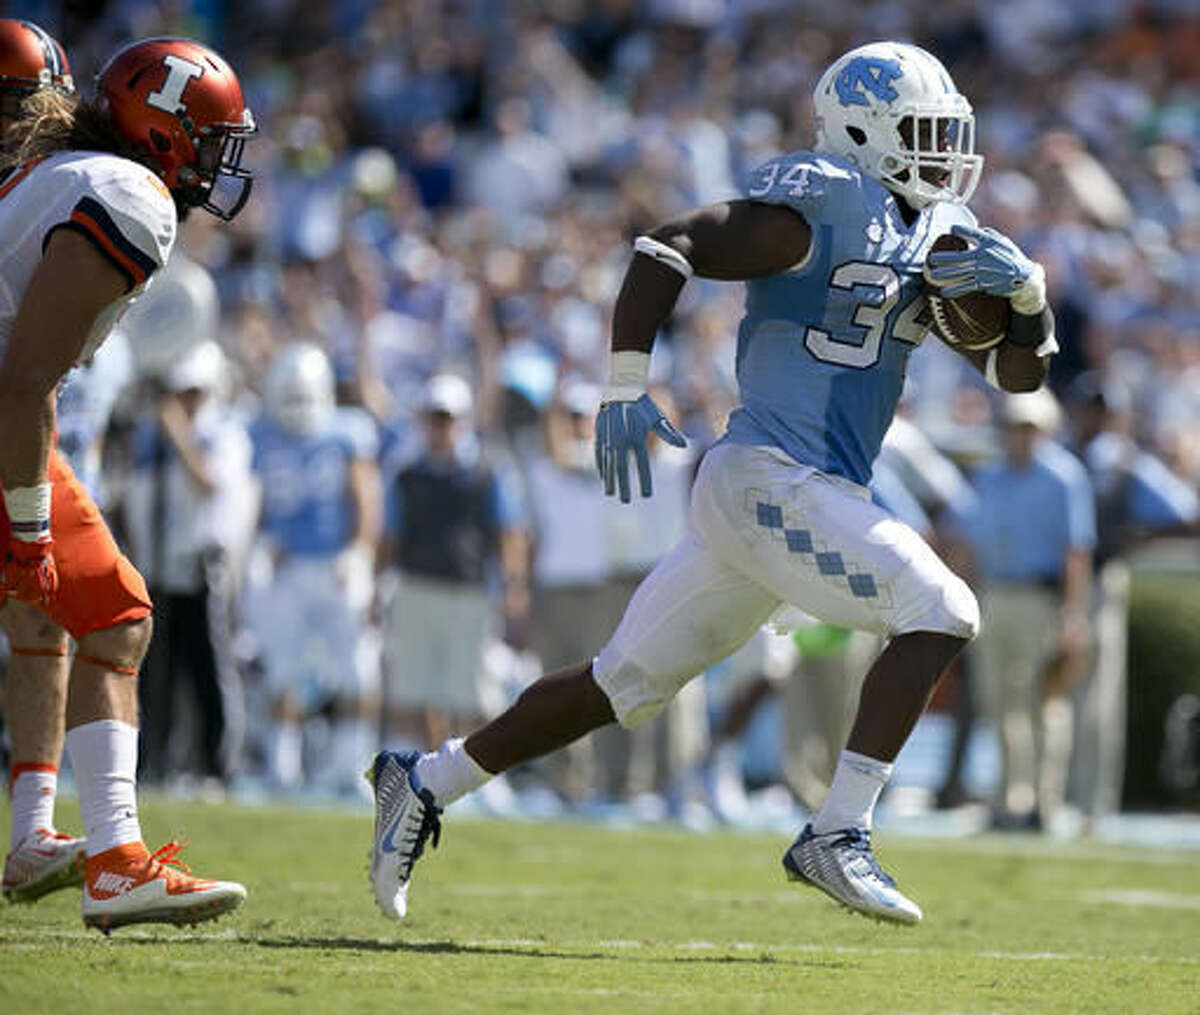 FILE - In this Sept. 19, 2015, file photo, North Carolina tailback Elijah Hood (34) races to the end zone for a 28-yard touchdown during an NCAA football game against Illinois, in Chapel Hill, N.C. Hood ran for 17 touchdowns last year for the Coastal Division champion Tar Heels. (Robert Willett/The News & Observer via AP, File)